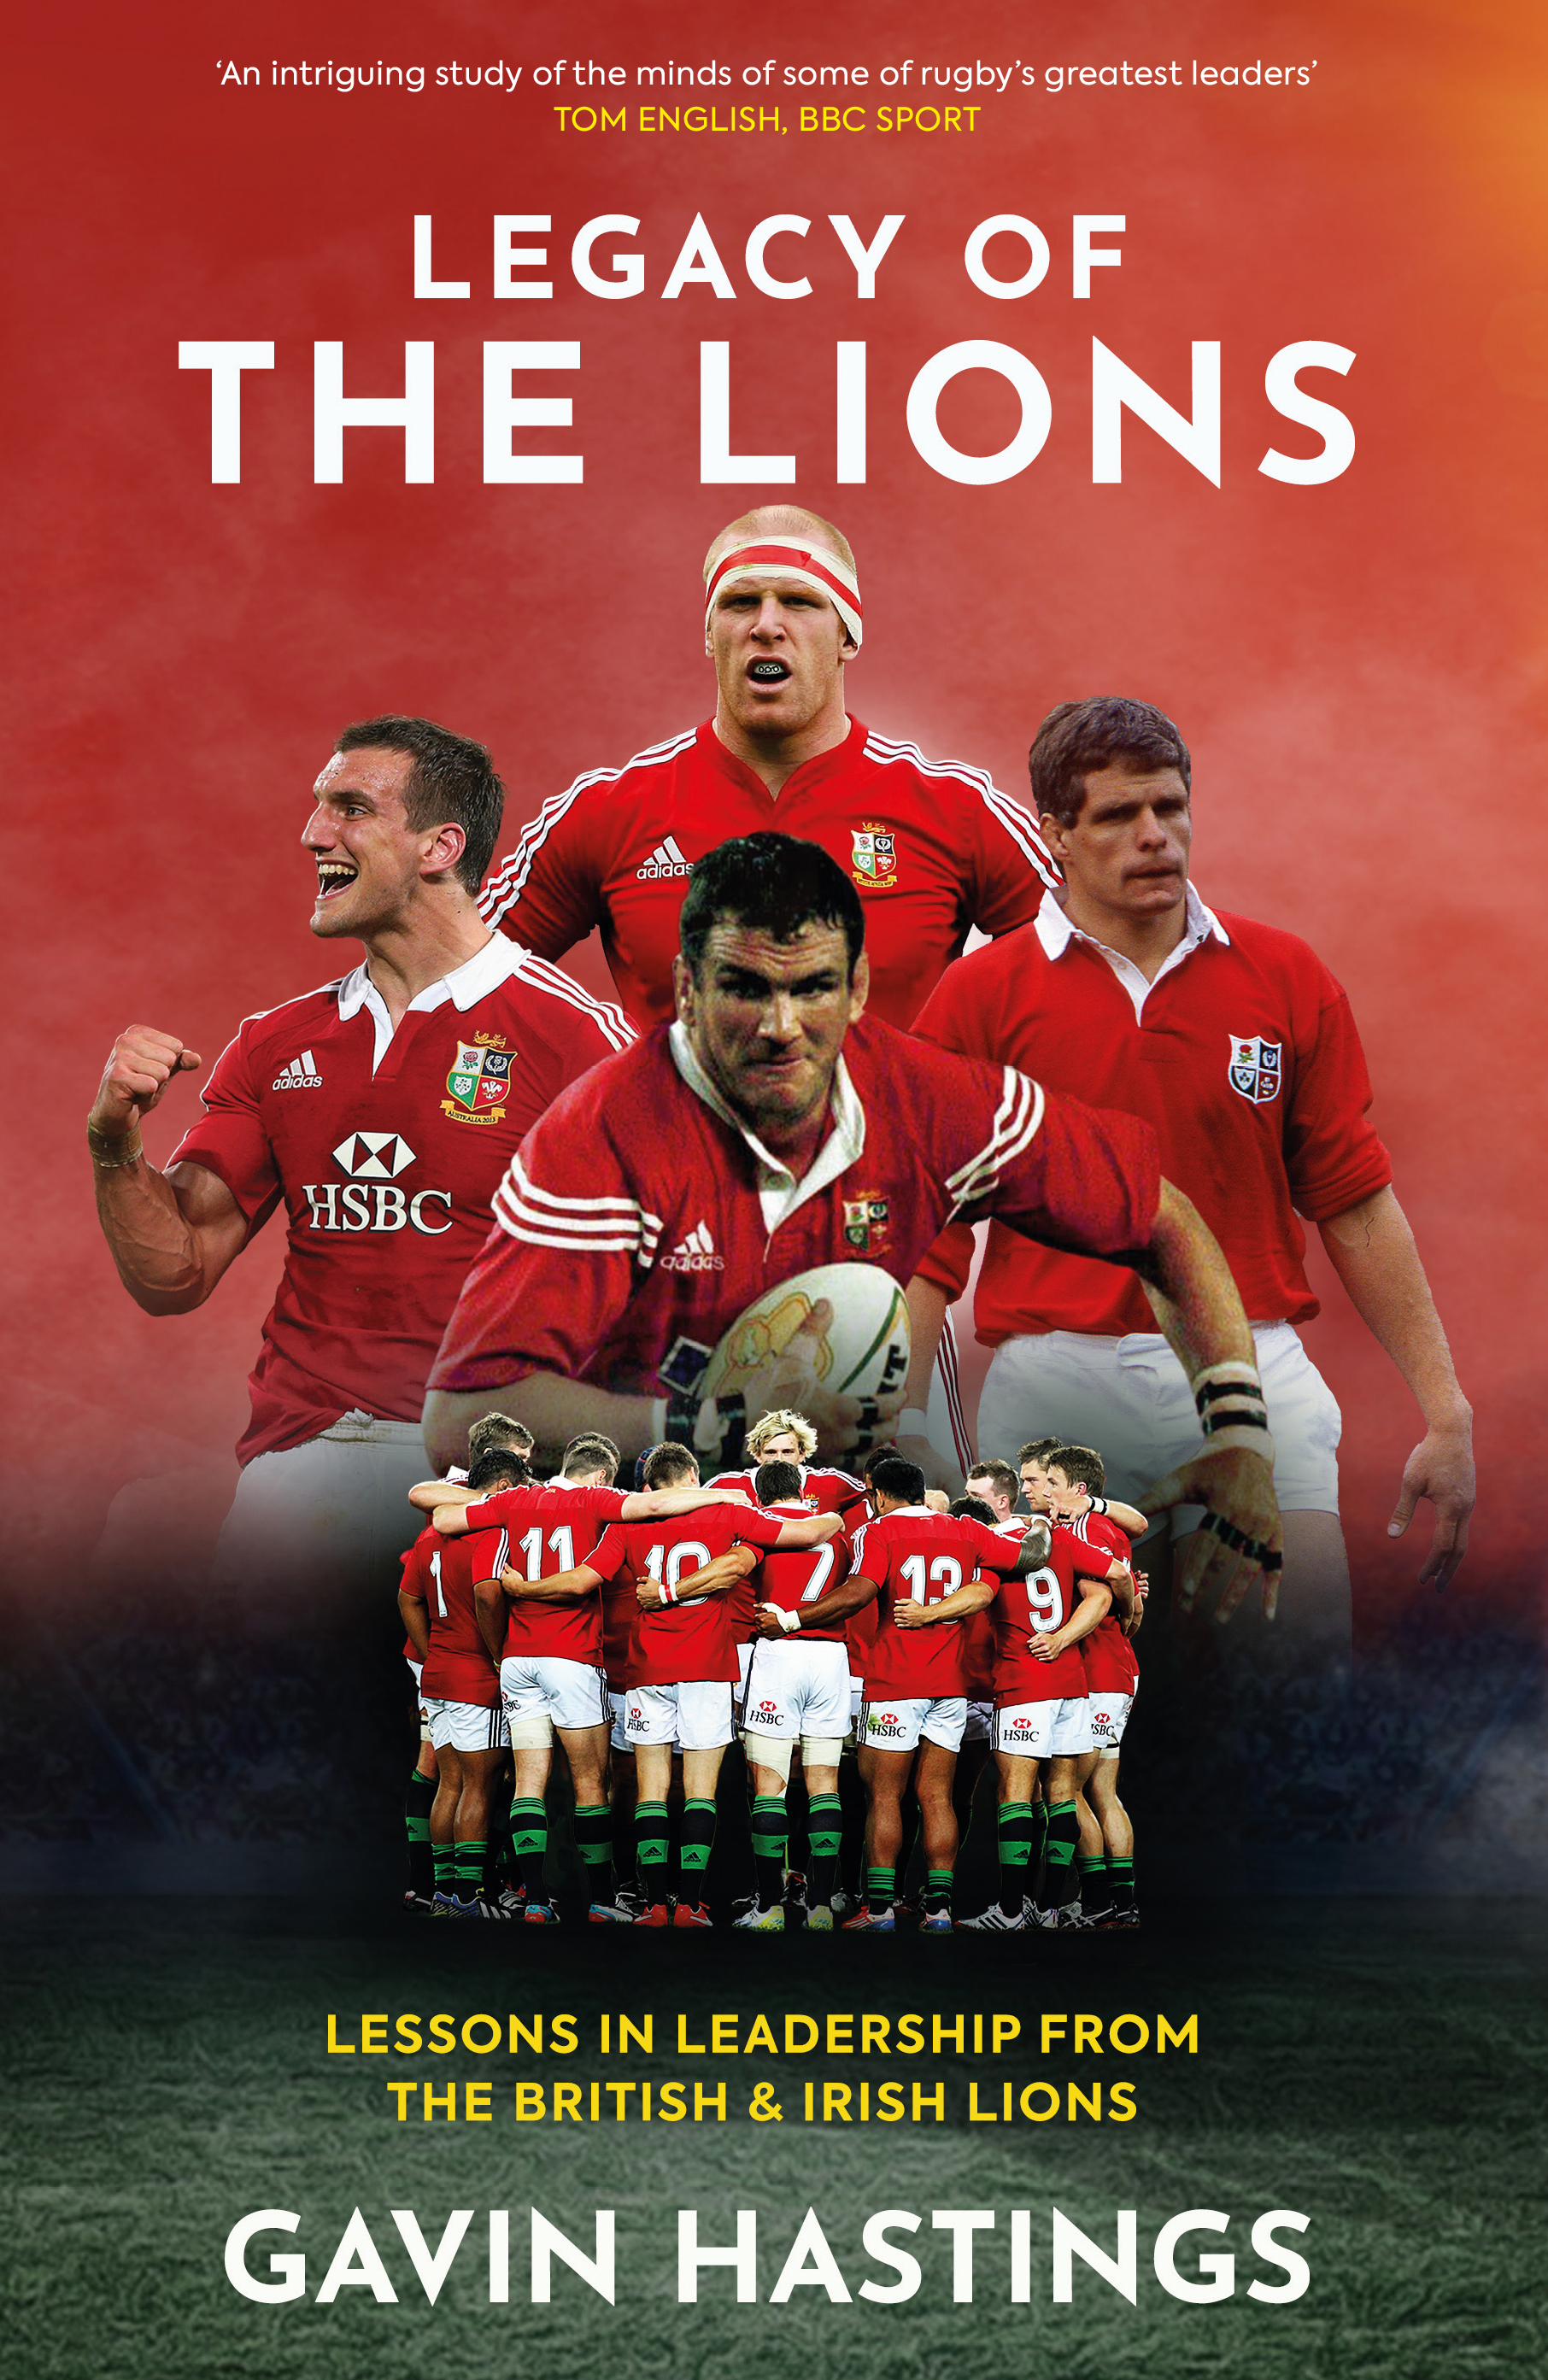 legacy_of_lions_7